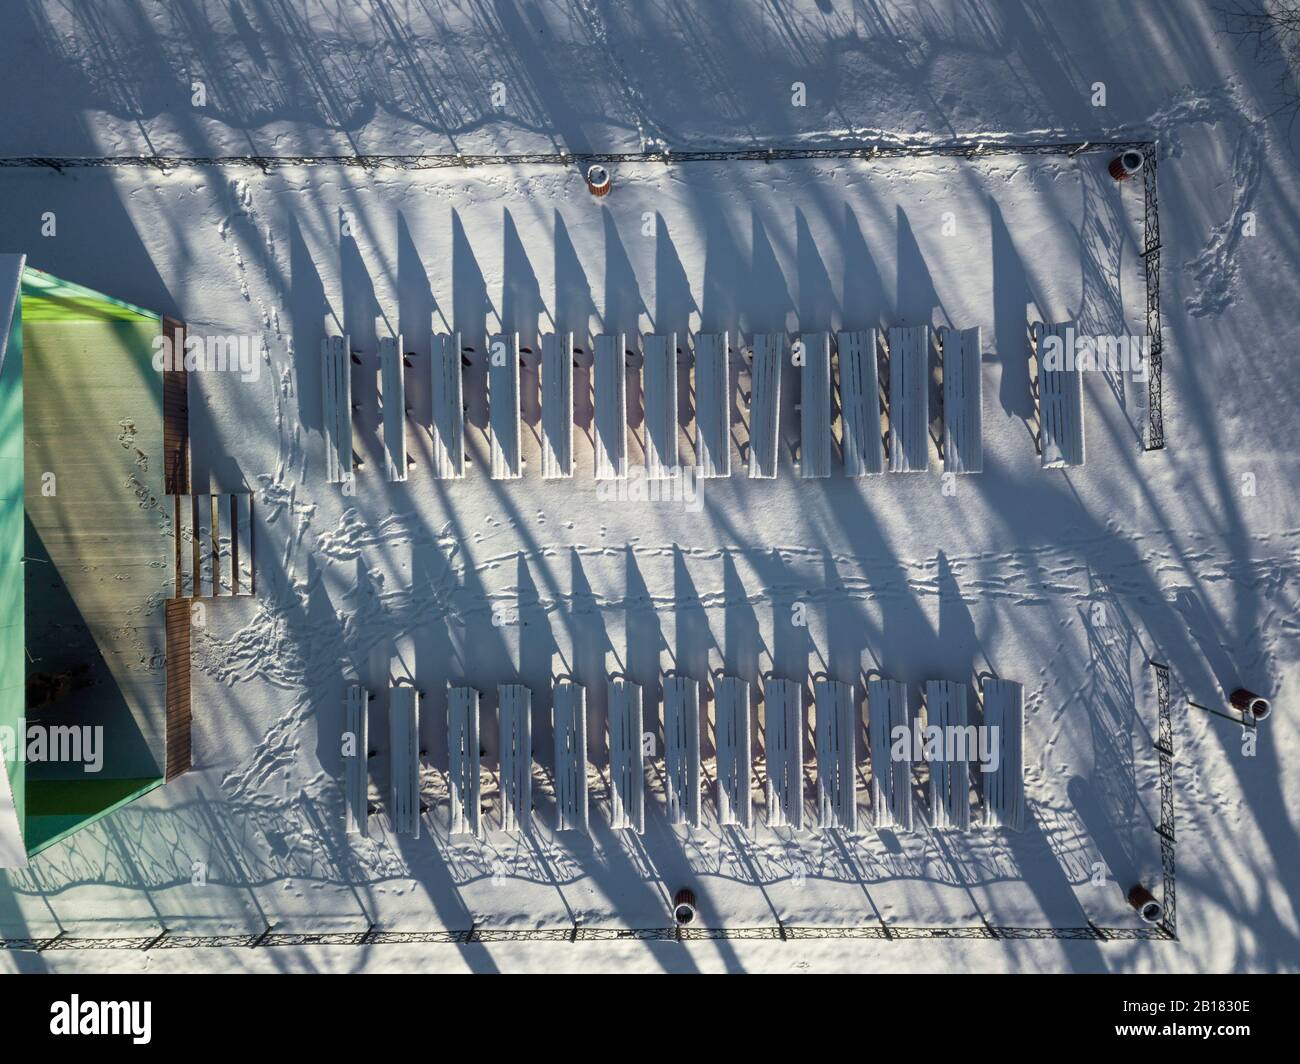 Russia, Saint Petersburg, Aerial view of open air stage in winter Stock Photo